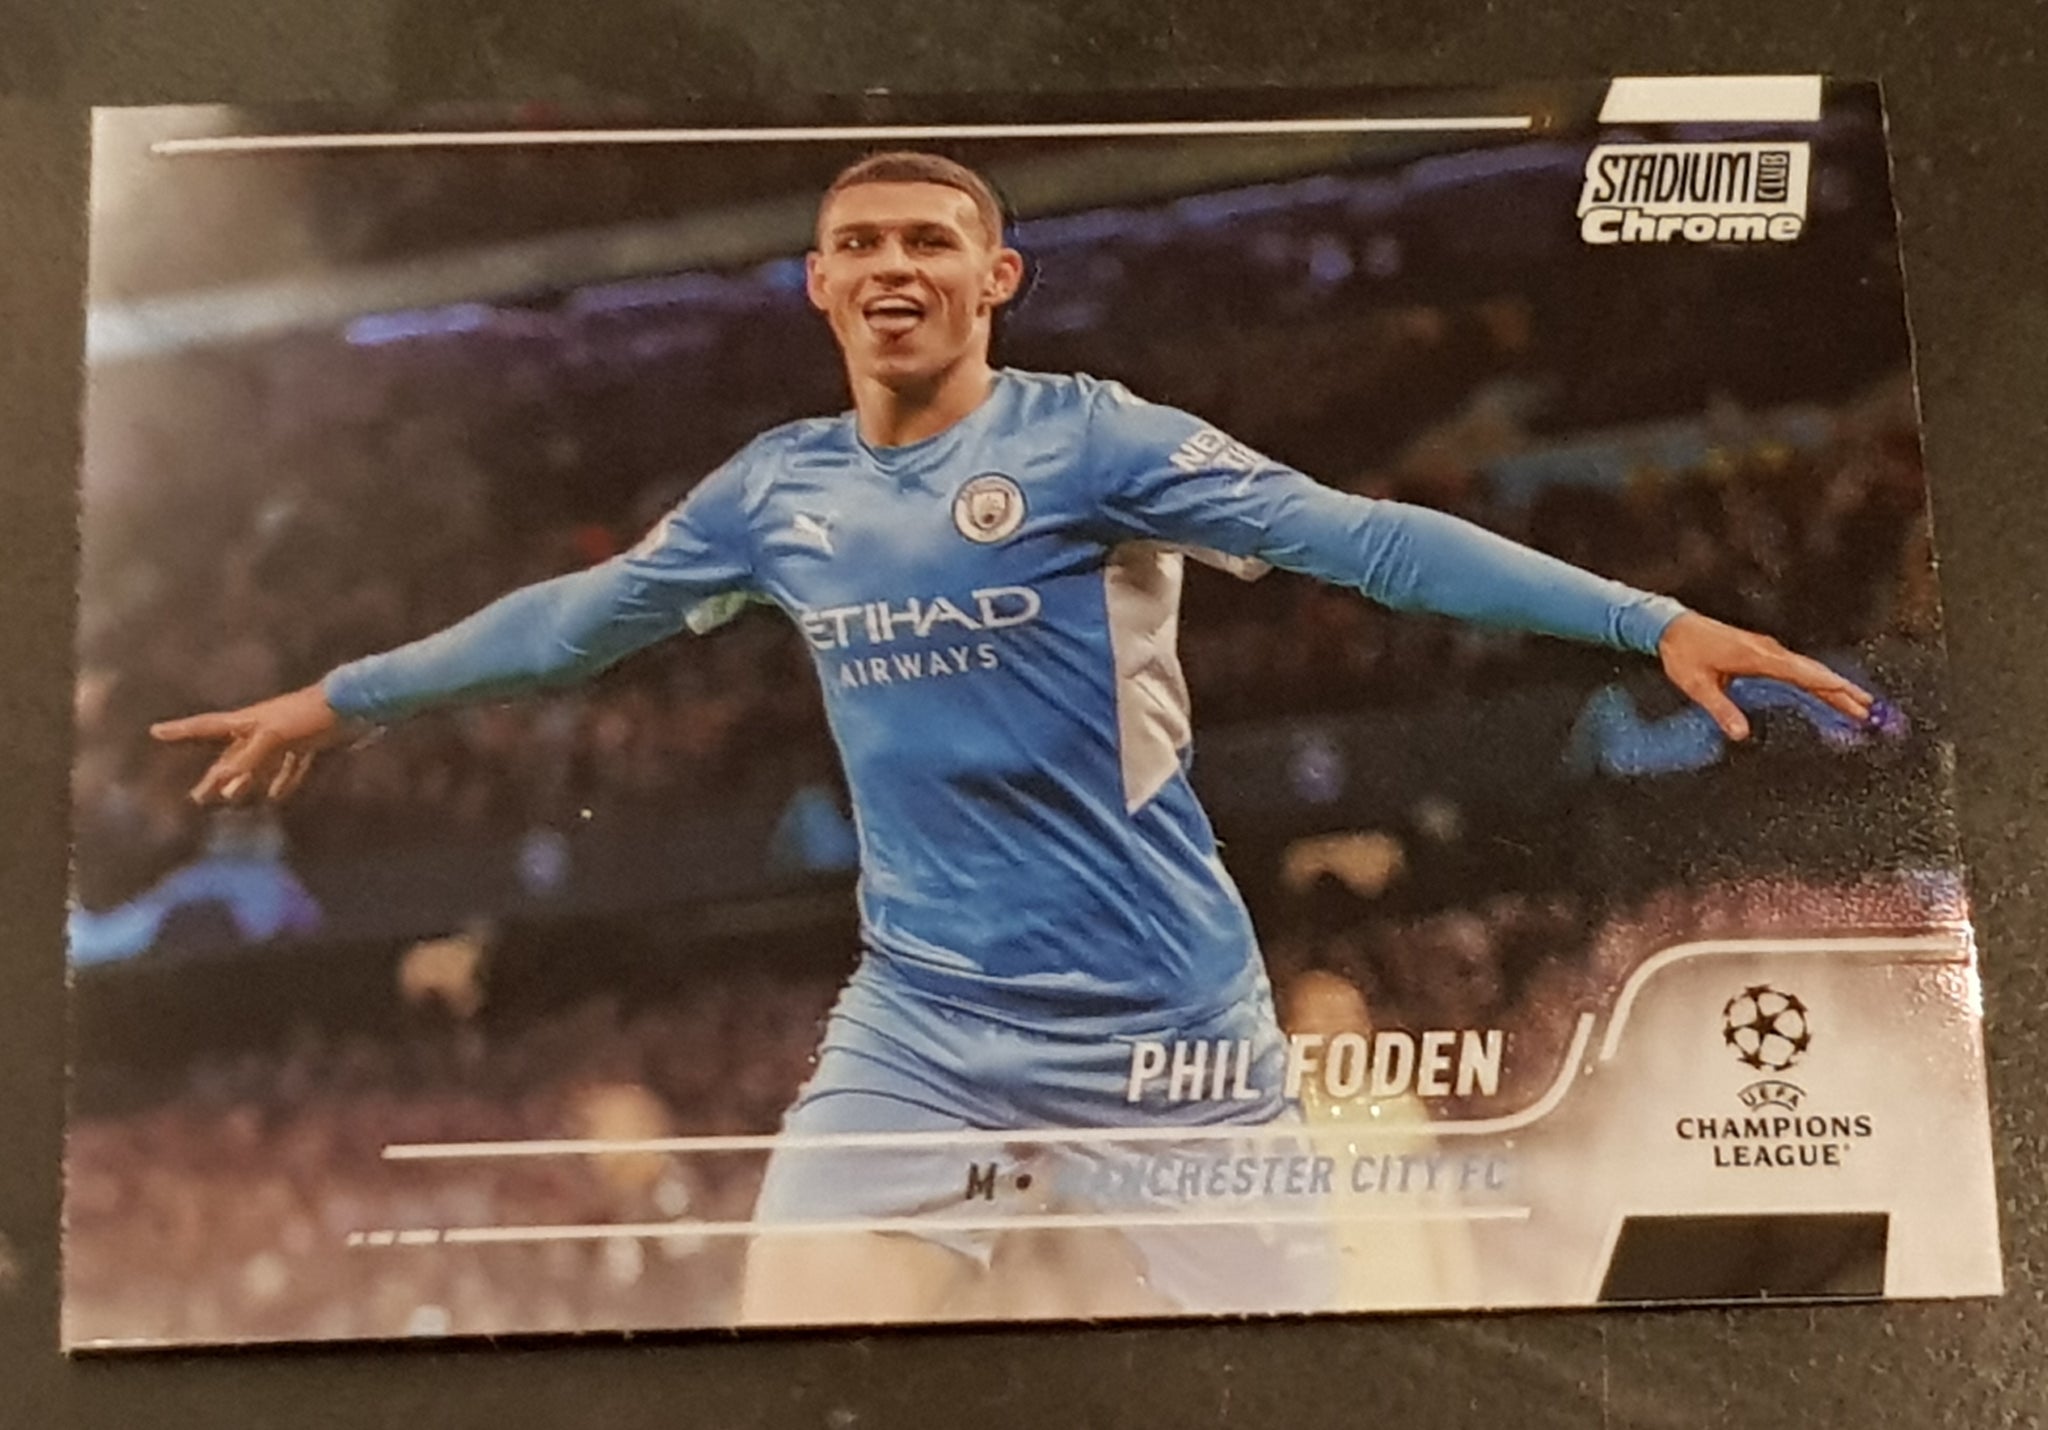 2021-22 Topps Stadium Club Chrome Champions League Phil Foden #47 Trading Card